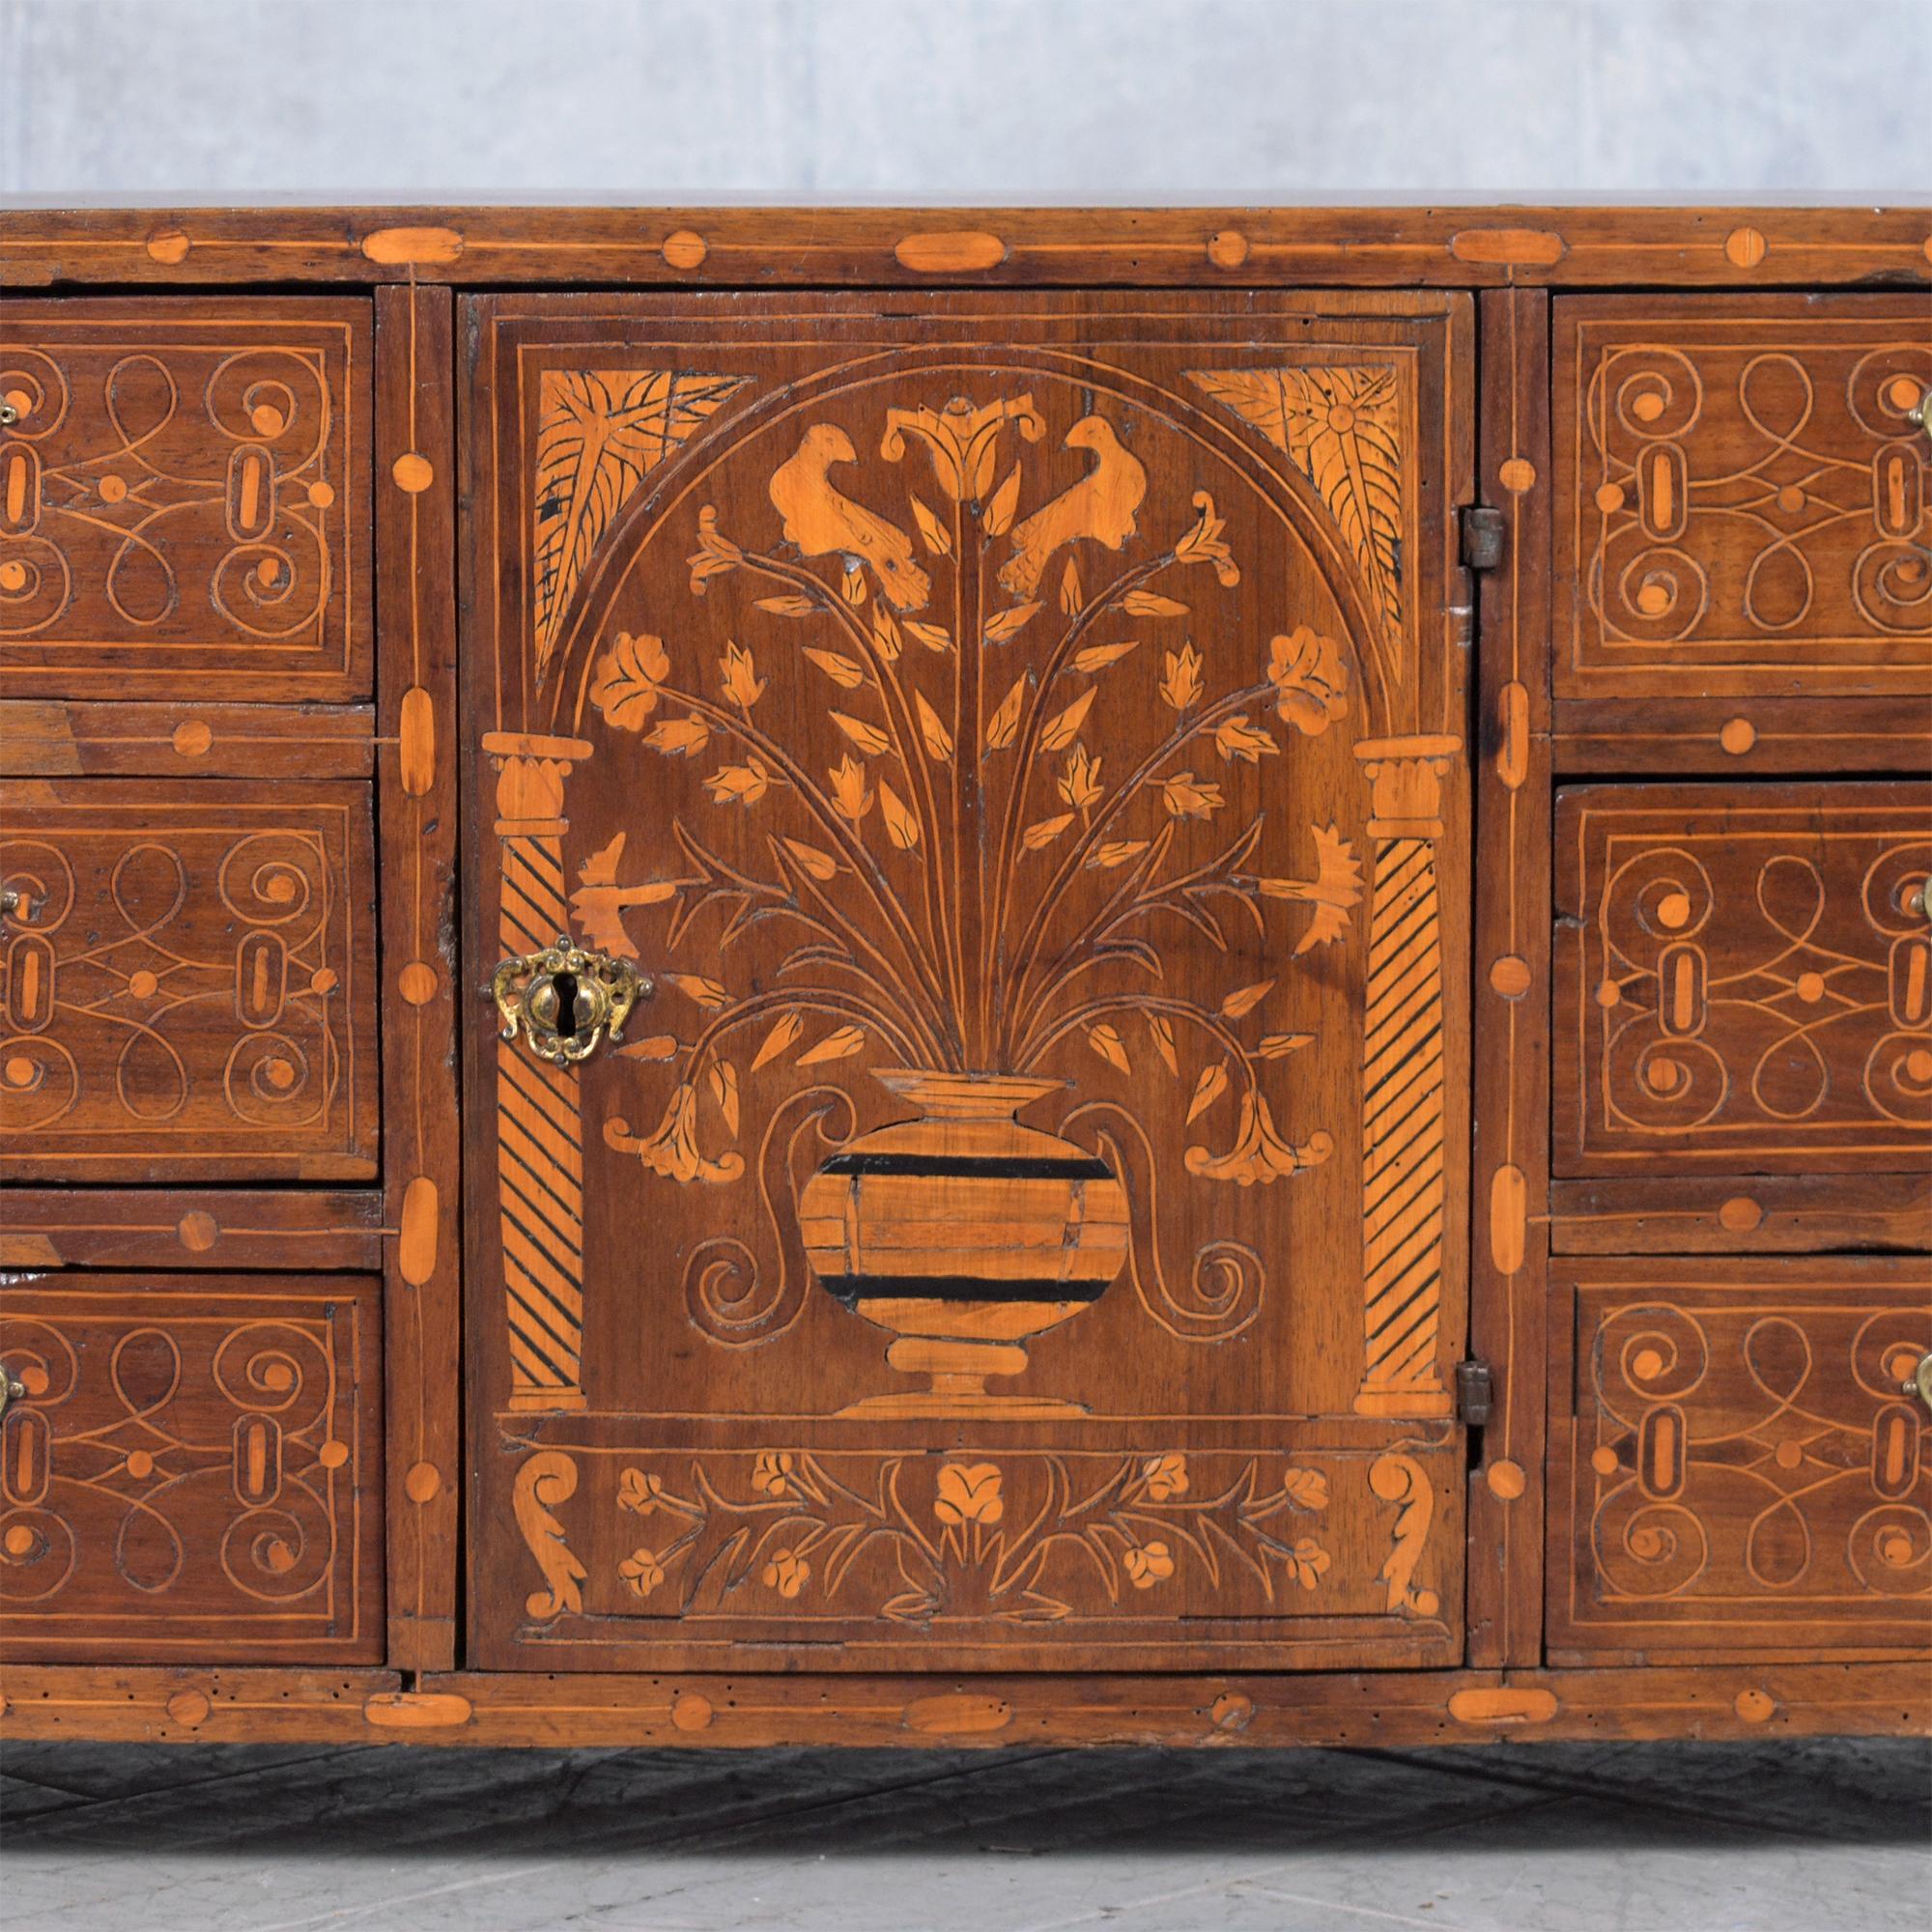 Baroque Exquisite 18th-Century Spanish Bargueño Cabinet: Walnut with Marquetry Inlays For Sale